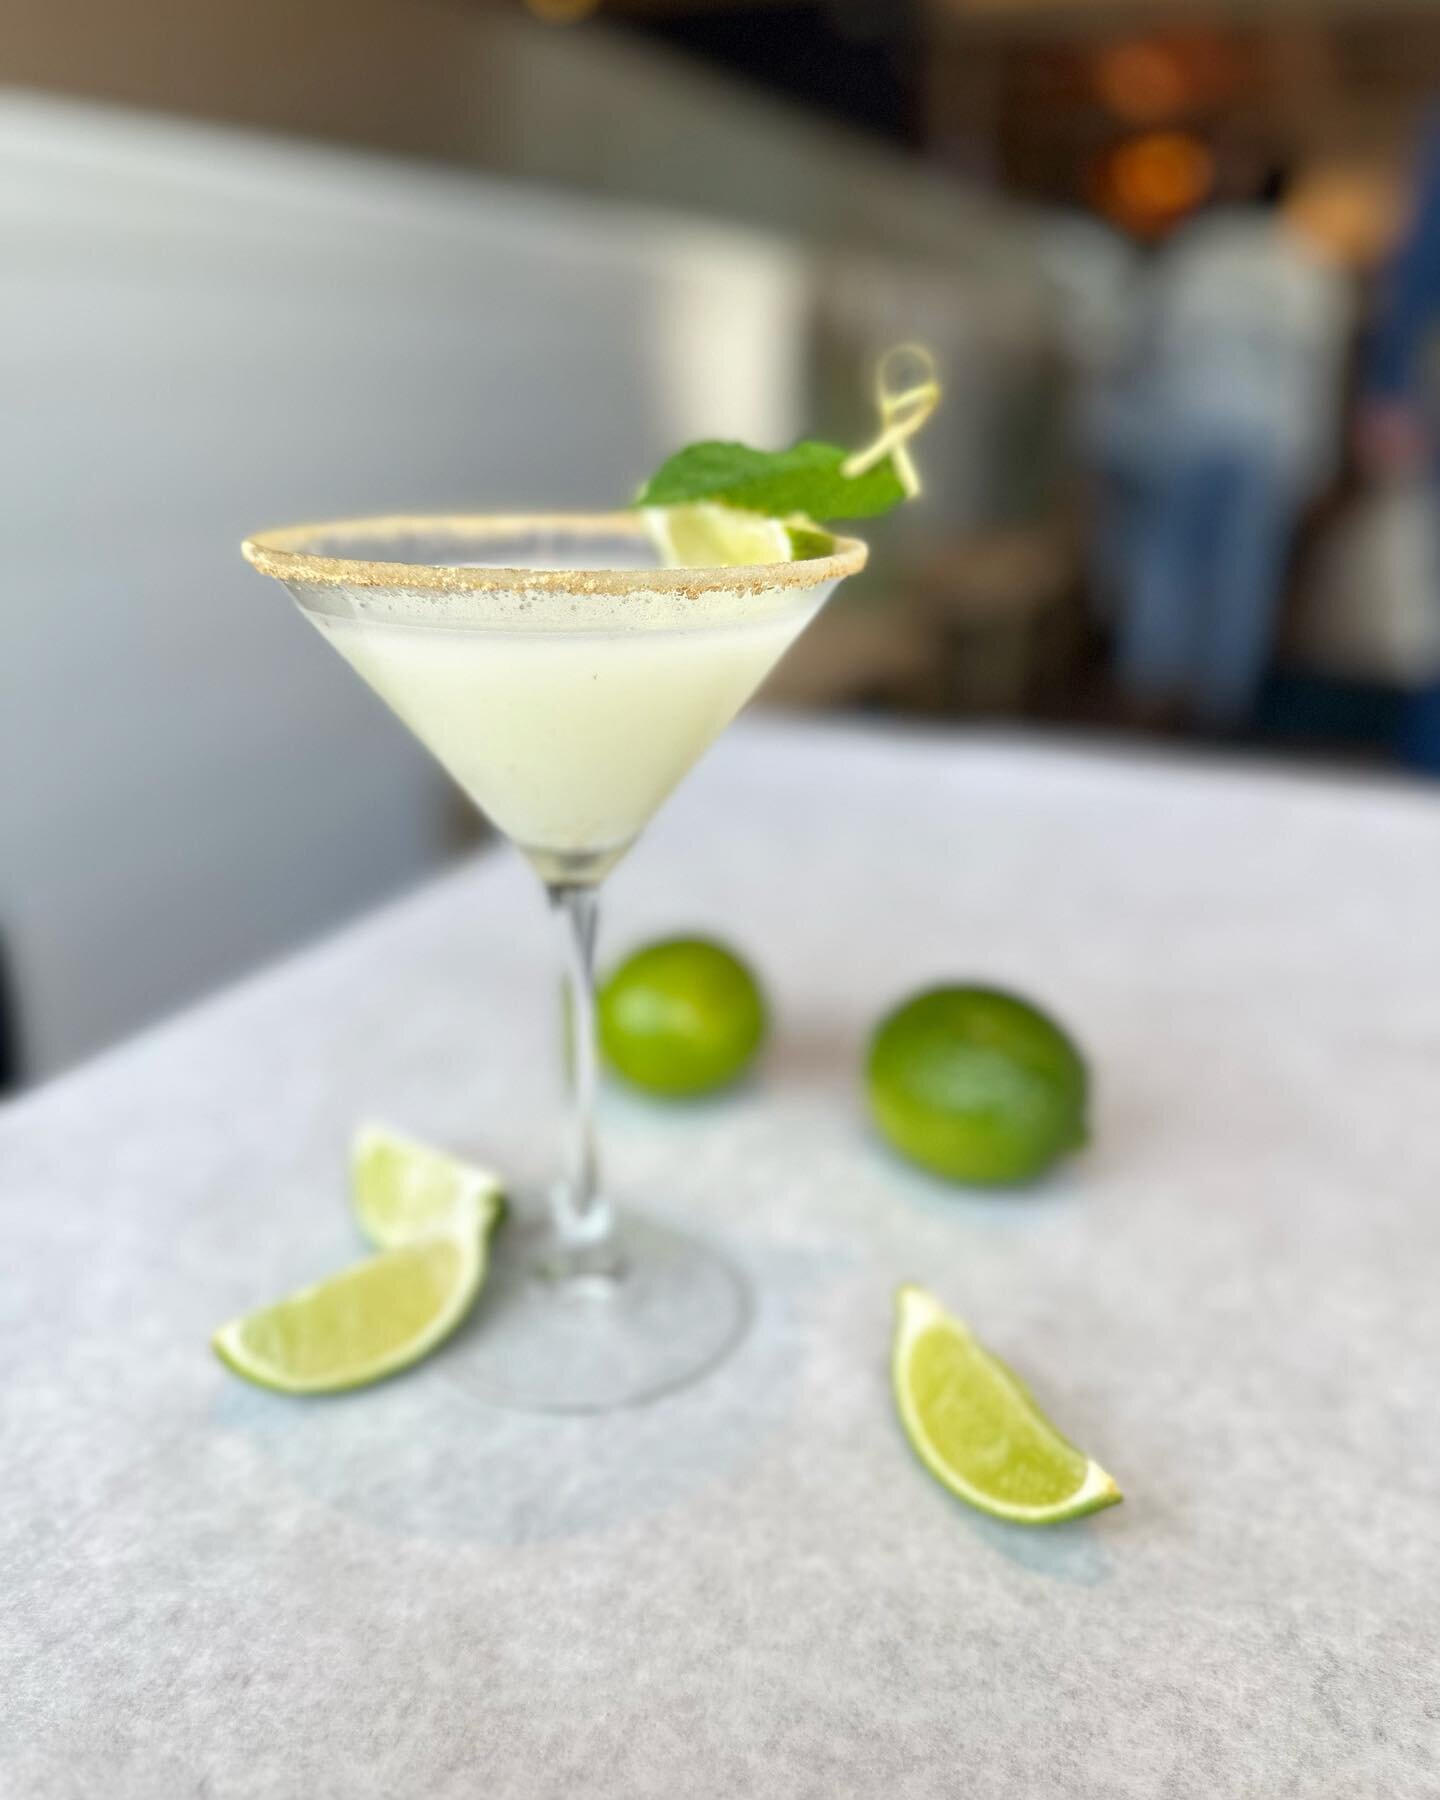 Here at Blue Point we are keeping the warm vibes going with drinks that remind you of vacation, such as our Florida Key Lime Martini 🍋 and our Sunshine in Mexico ☀️ (mezcal, pineapple, jalape&ntilde;o). Or taste the Autumn vibes with our signature O